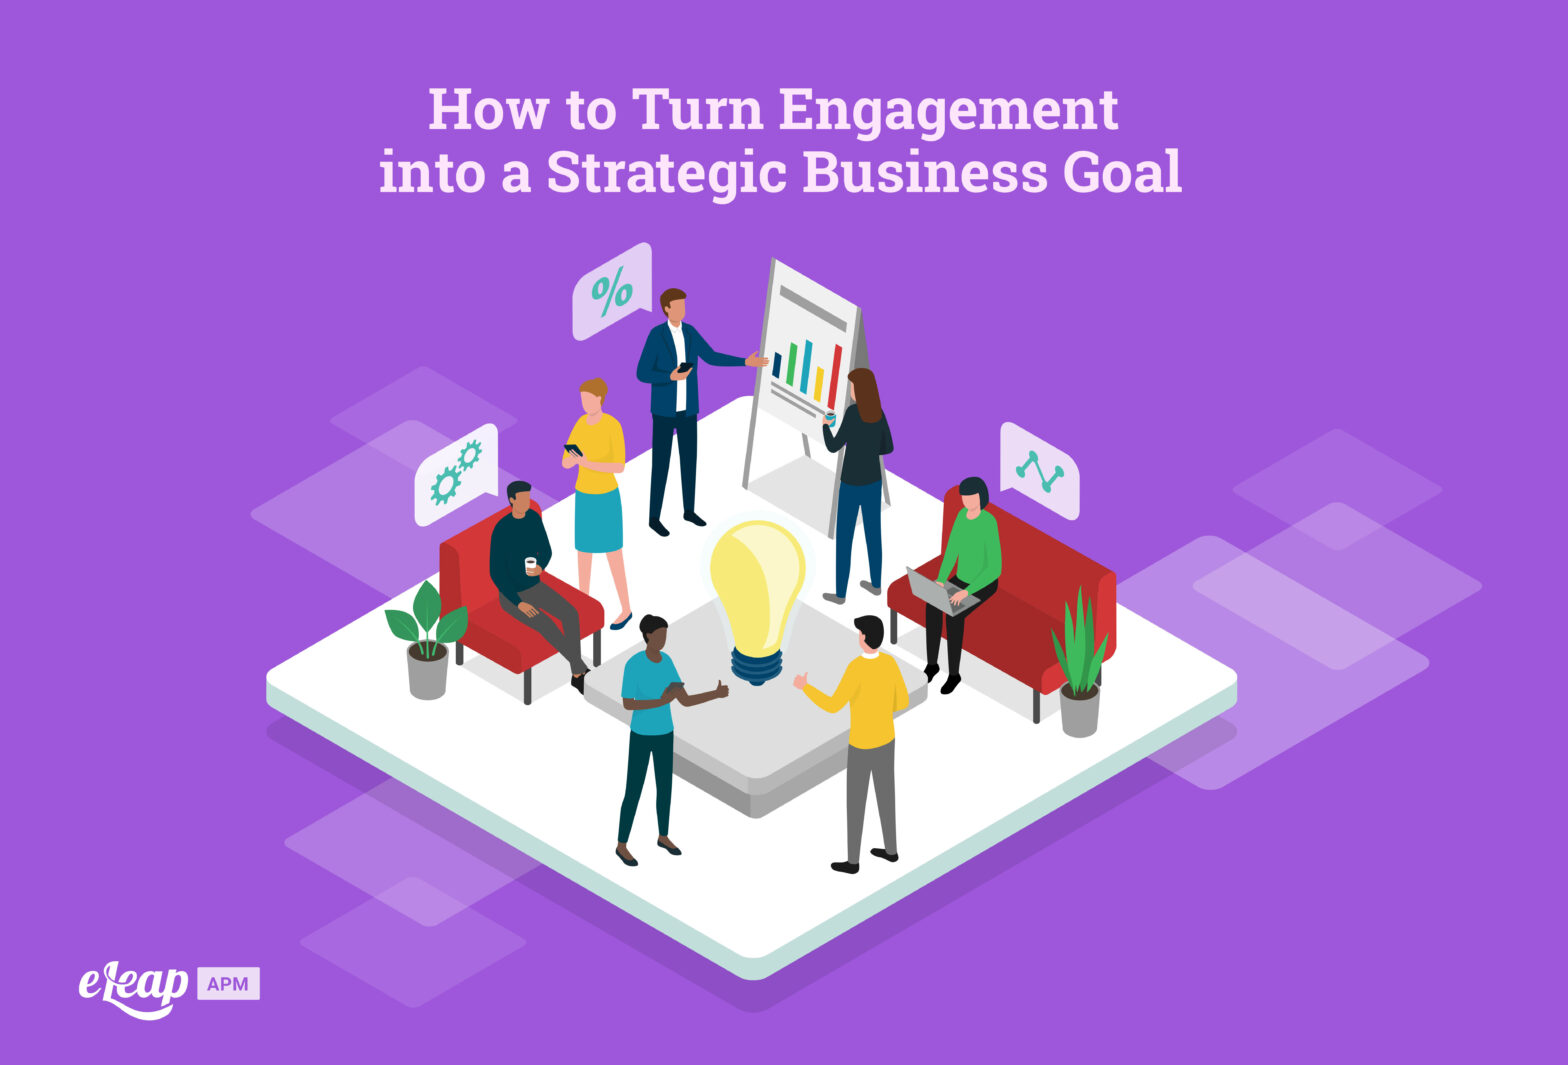 How to Turn Engagement into a Strategic Business Goal